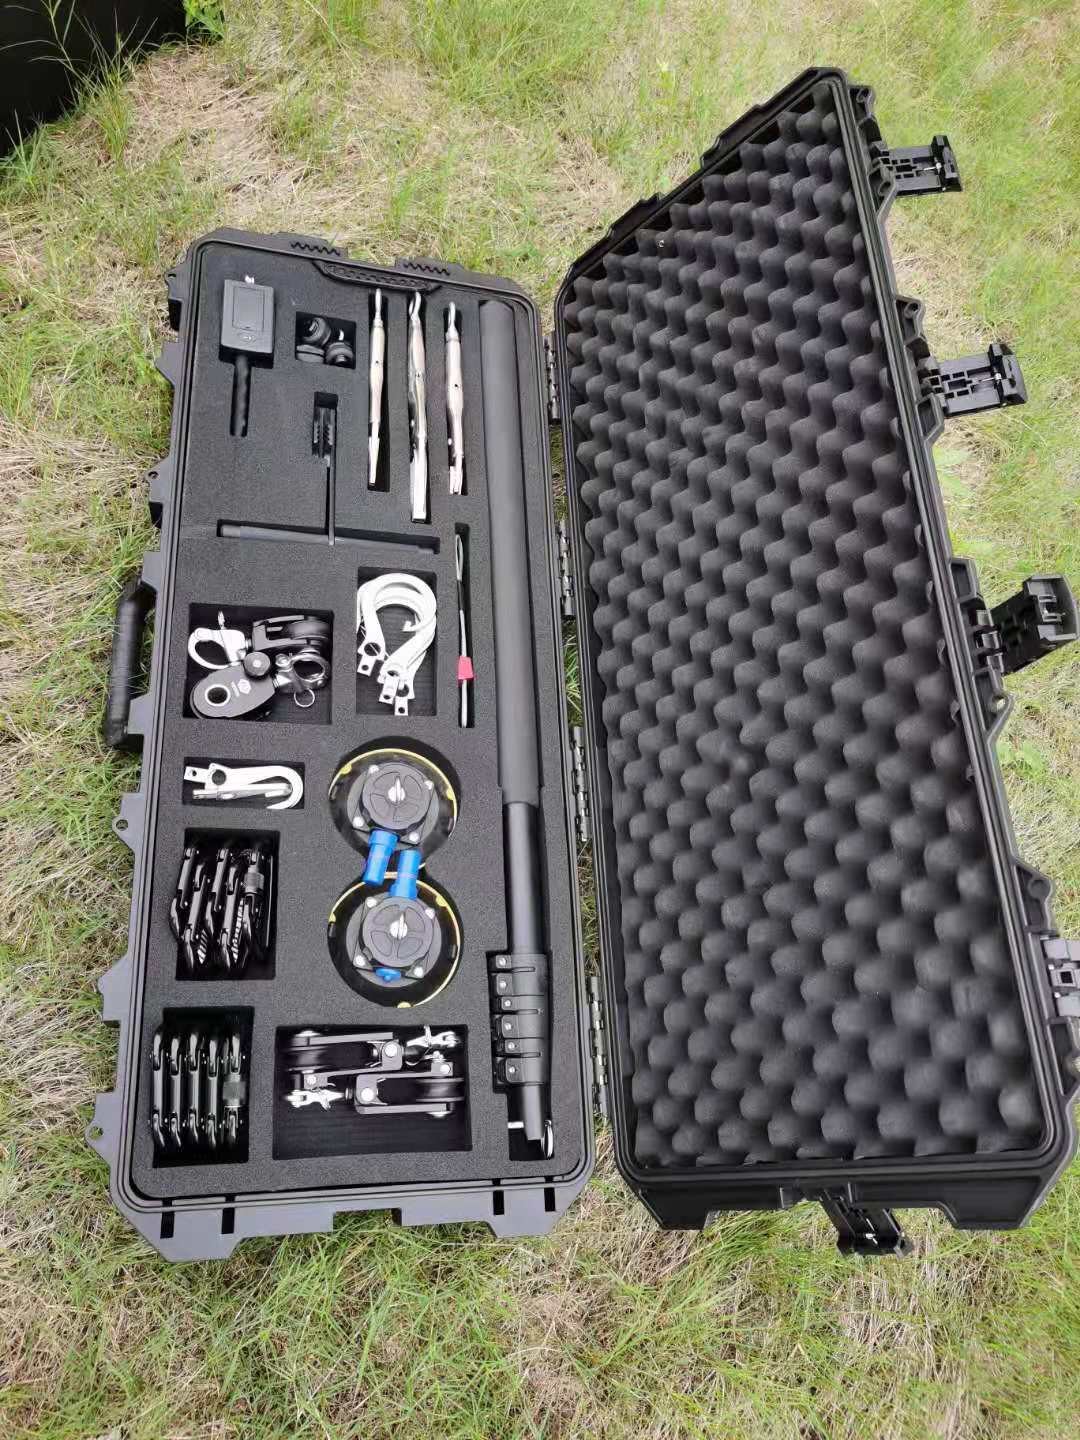 Best Advance Hook And Line Eod Tool Kits Stainless Steel wholesale